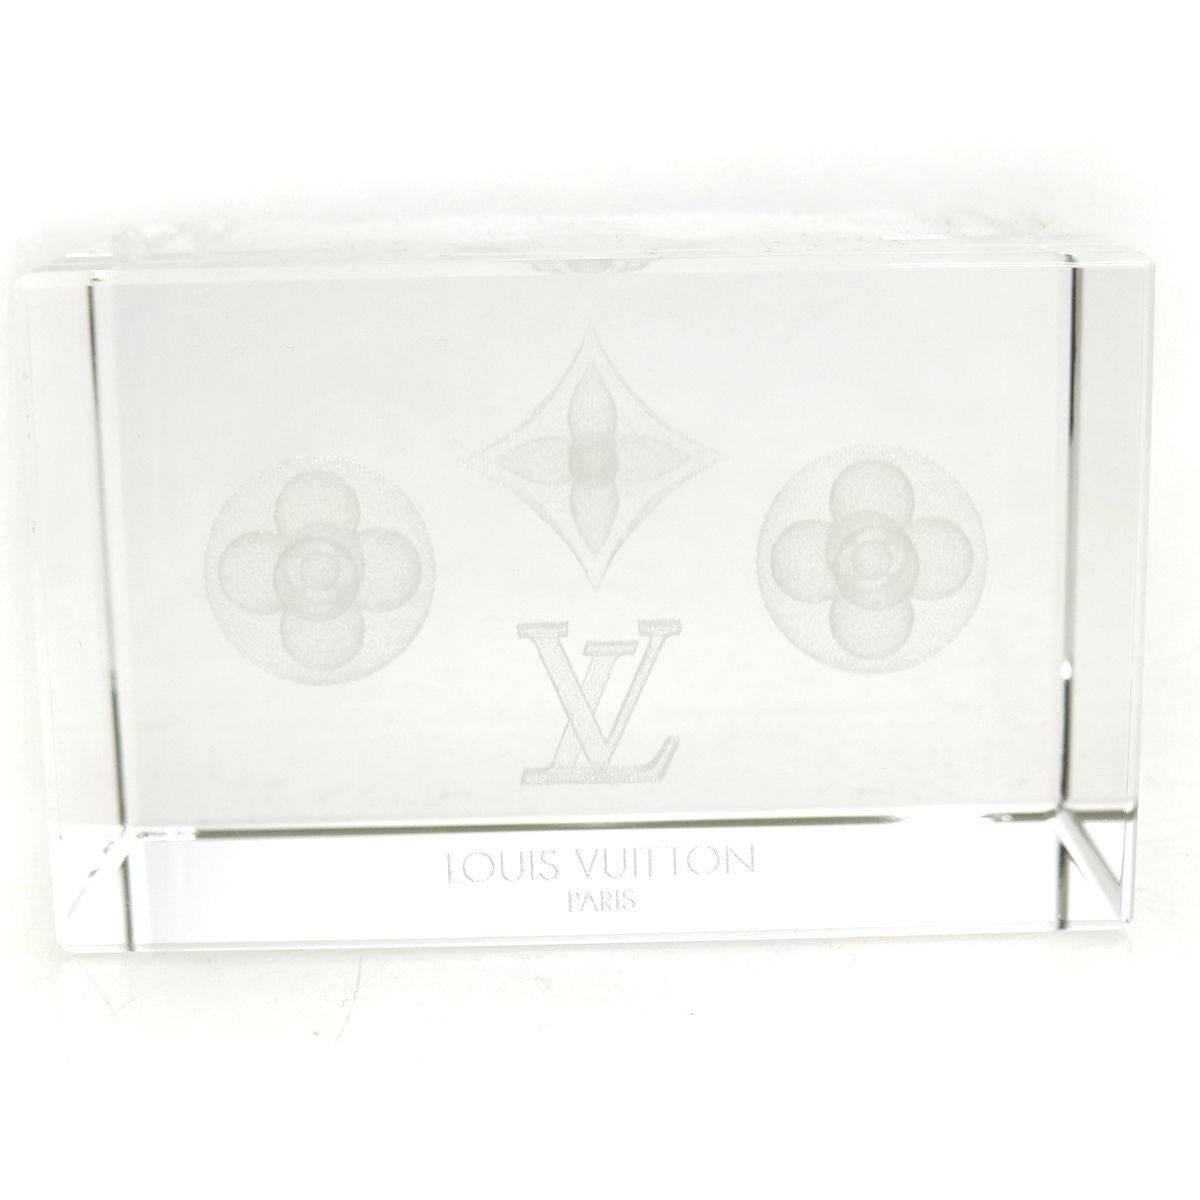 NEW! Louis Vuitton Monogram Crystal Cube Desk Table Decorative Paper Weight in Box

Heavy and substantial, this statement home good is the ideal accent for any study, den, office or coffee table.

Crystal
Made in France 
Measures 3